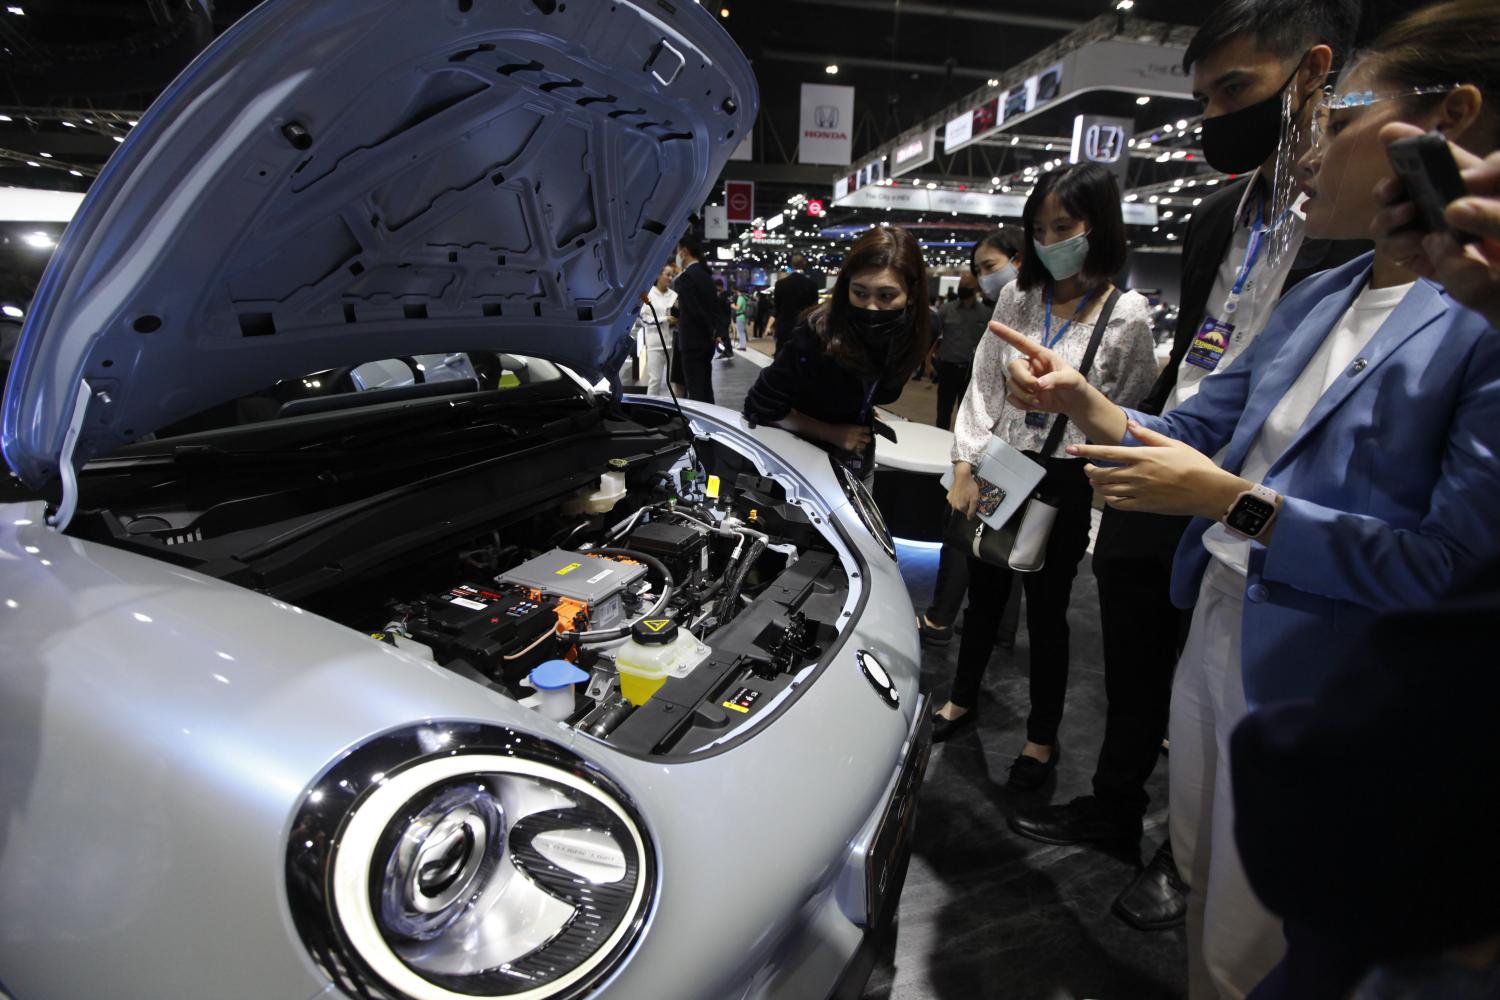 People inspect an electric vehicle at the Bangkok International Motor Show 2021 held in March and April this year. (Photo: Varuth Hirunyatheb)